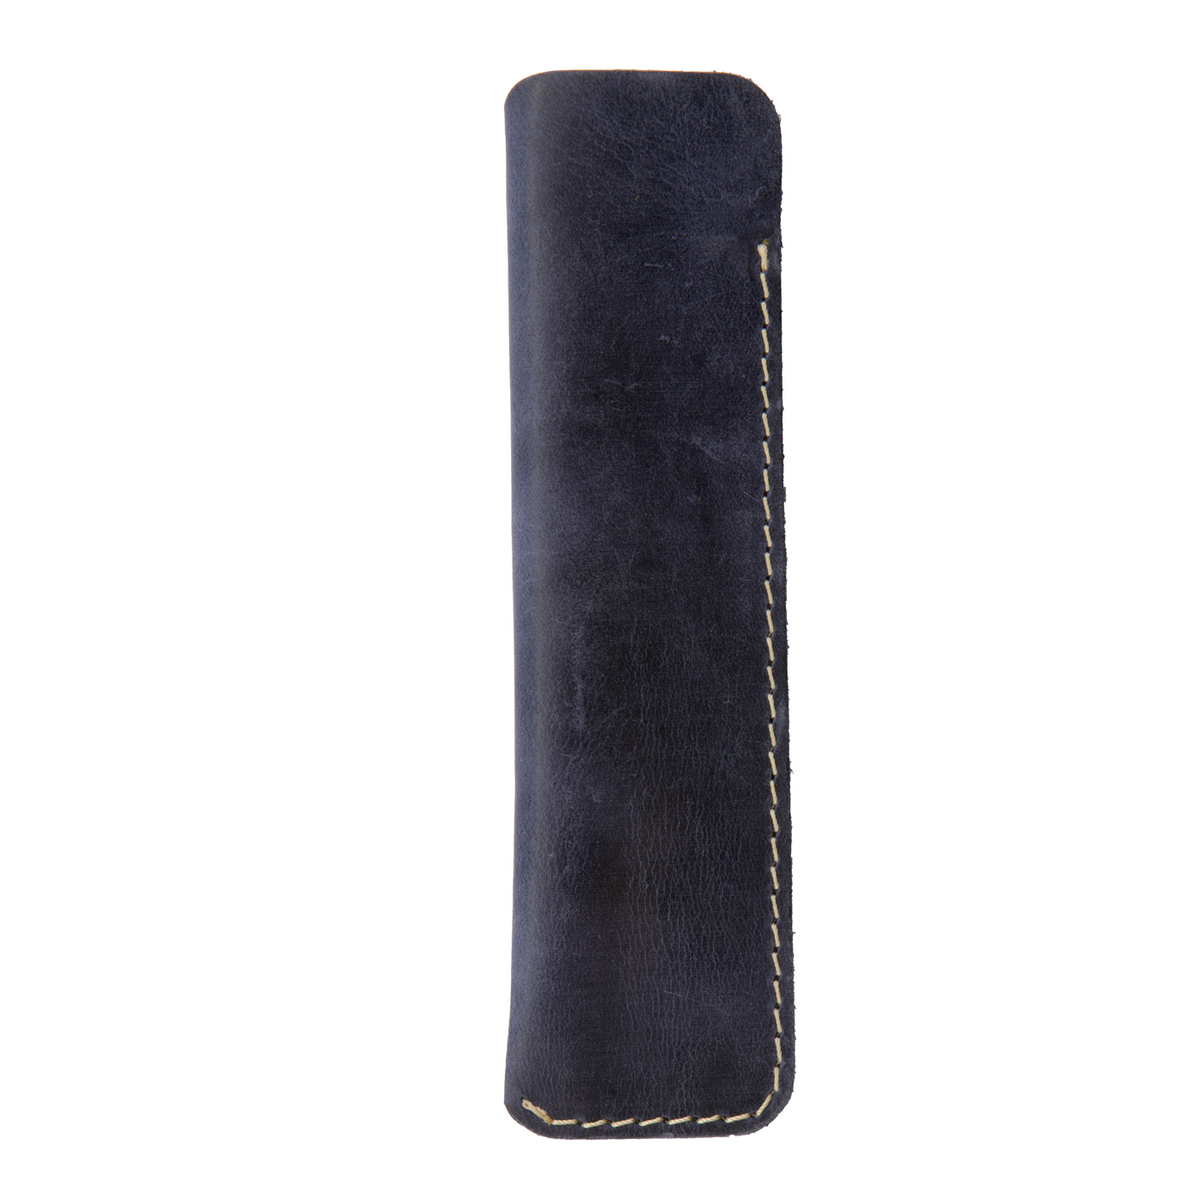 Galen Leather Co. Leather Single Pen Sleeve - Navy Blue